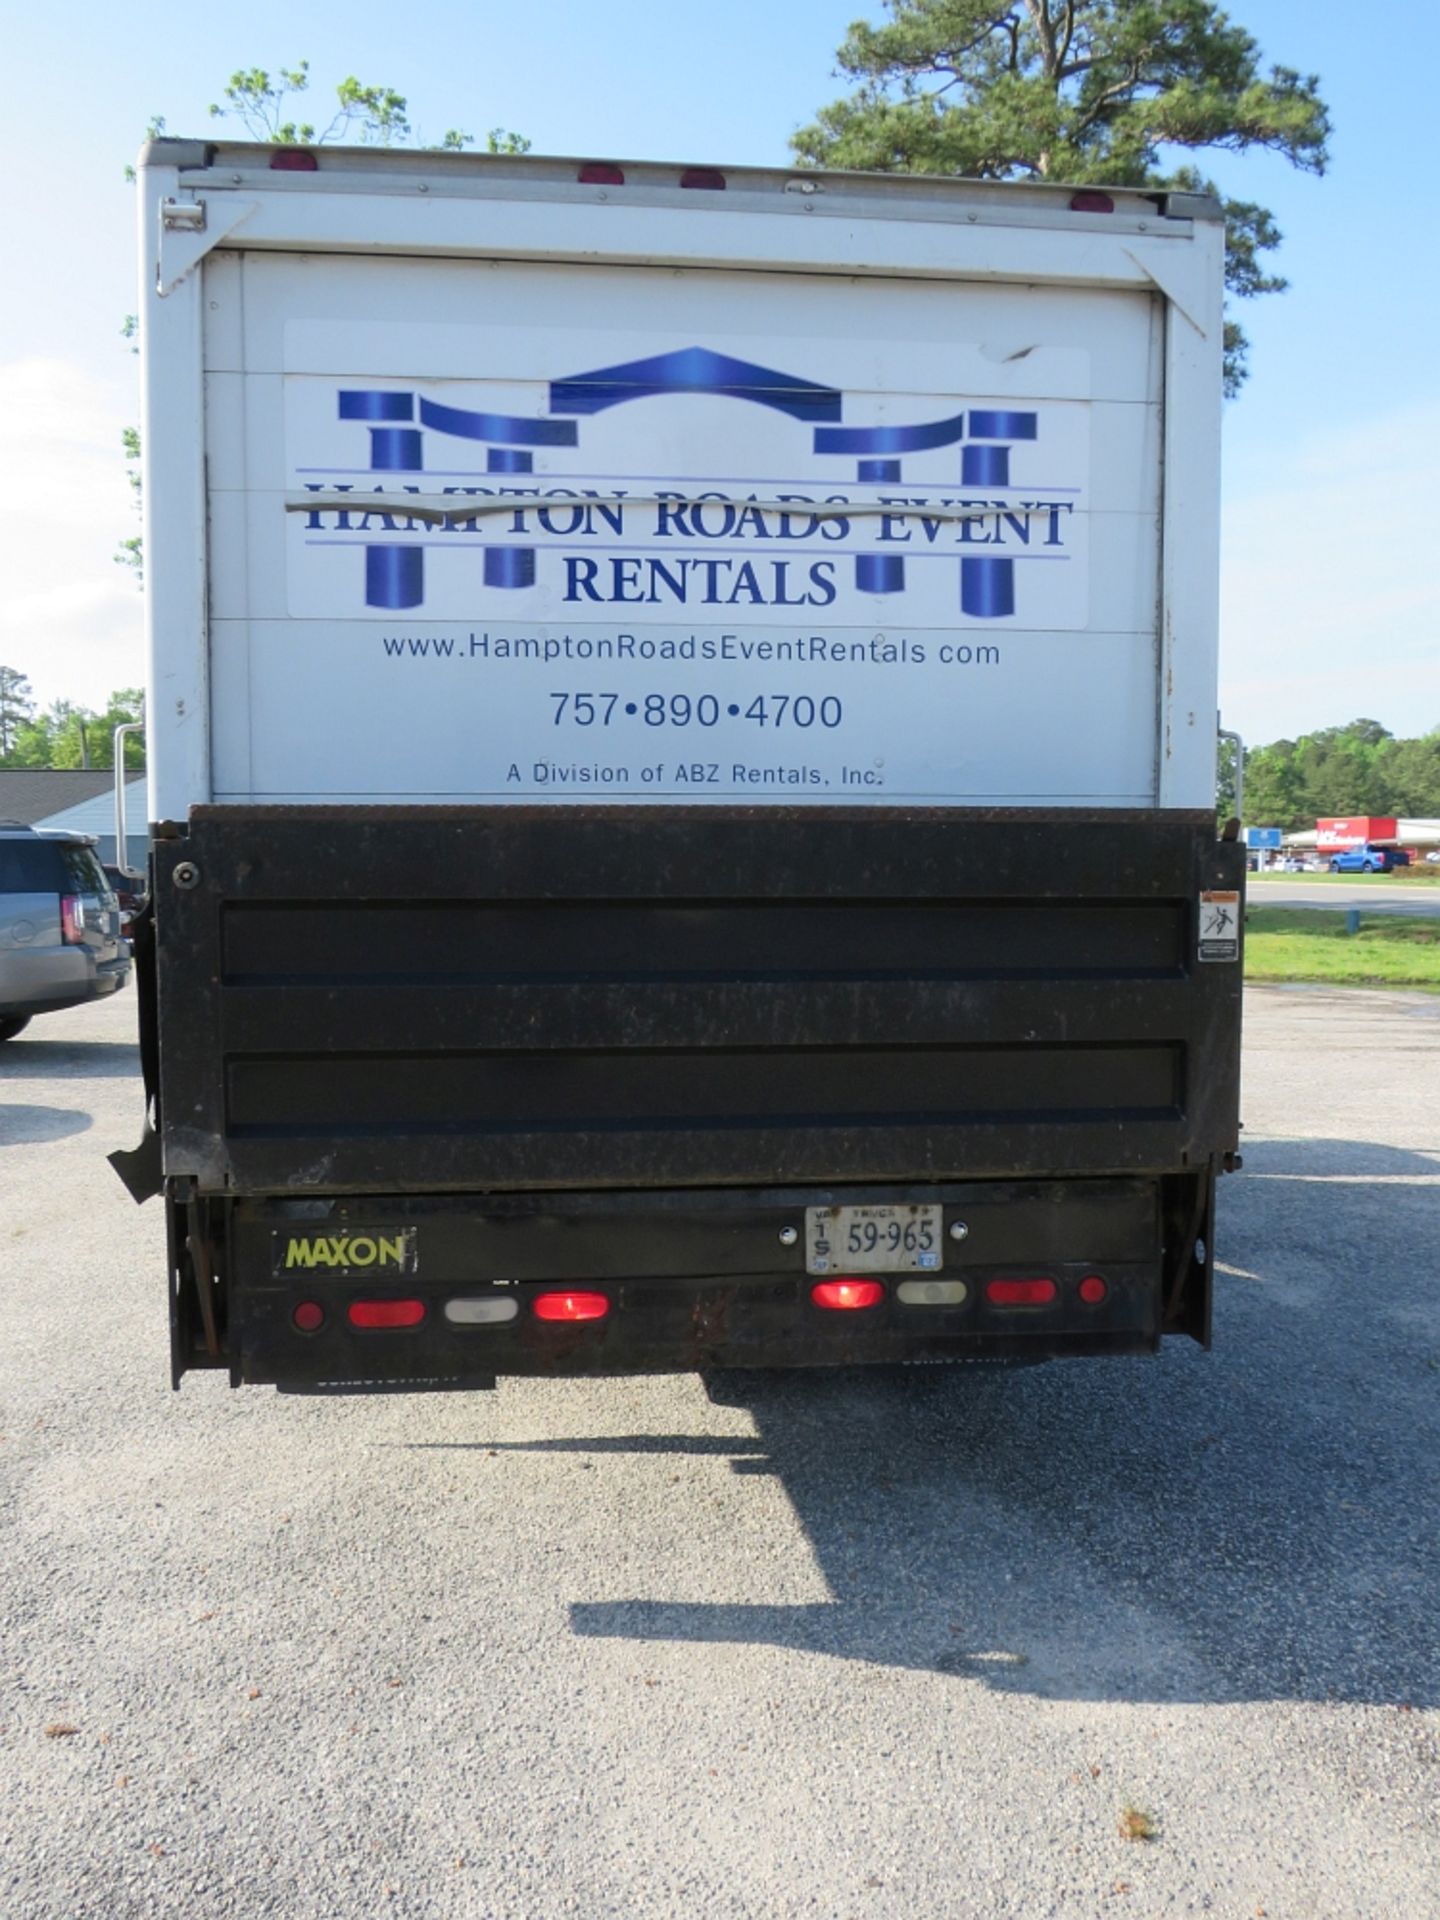 2005 GMC Delivery Truck, 14' Box, - Image 4 of 6